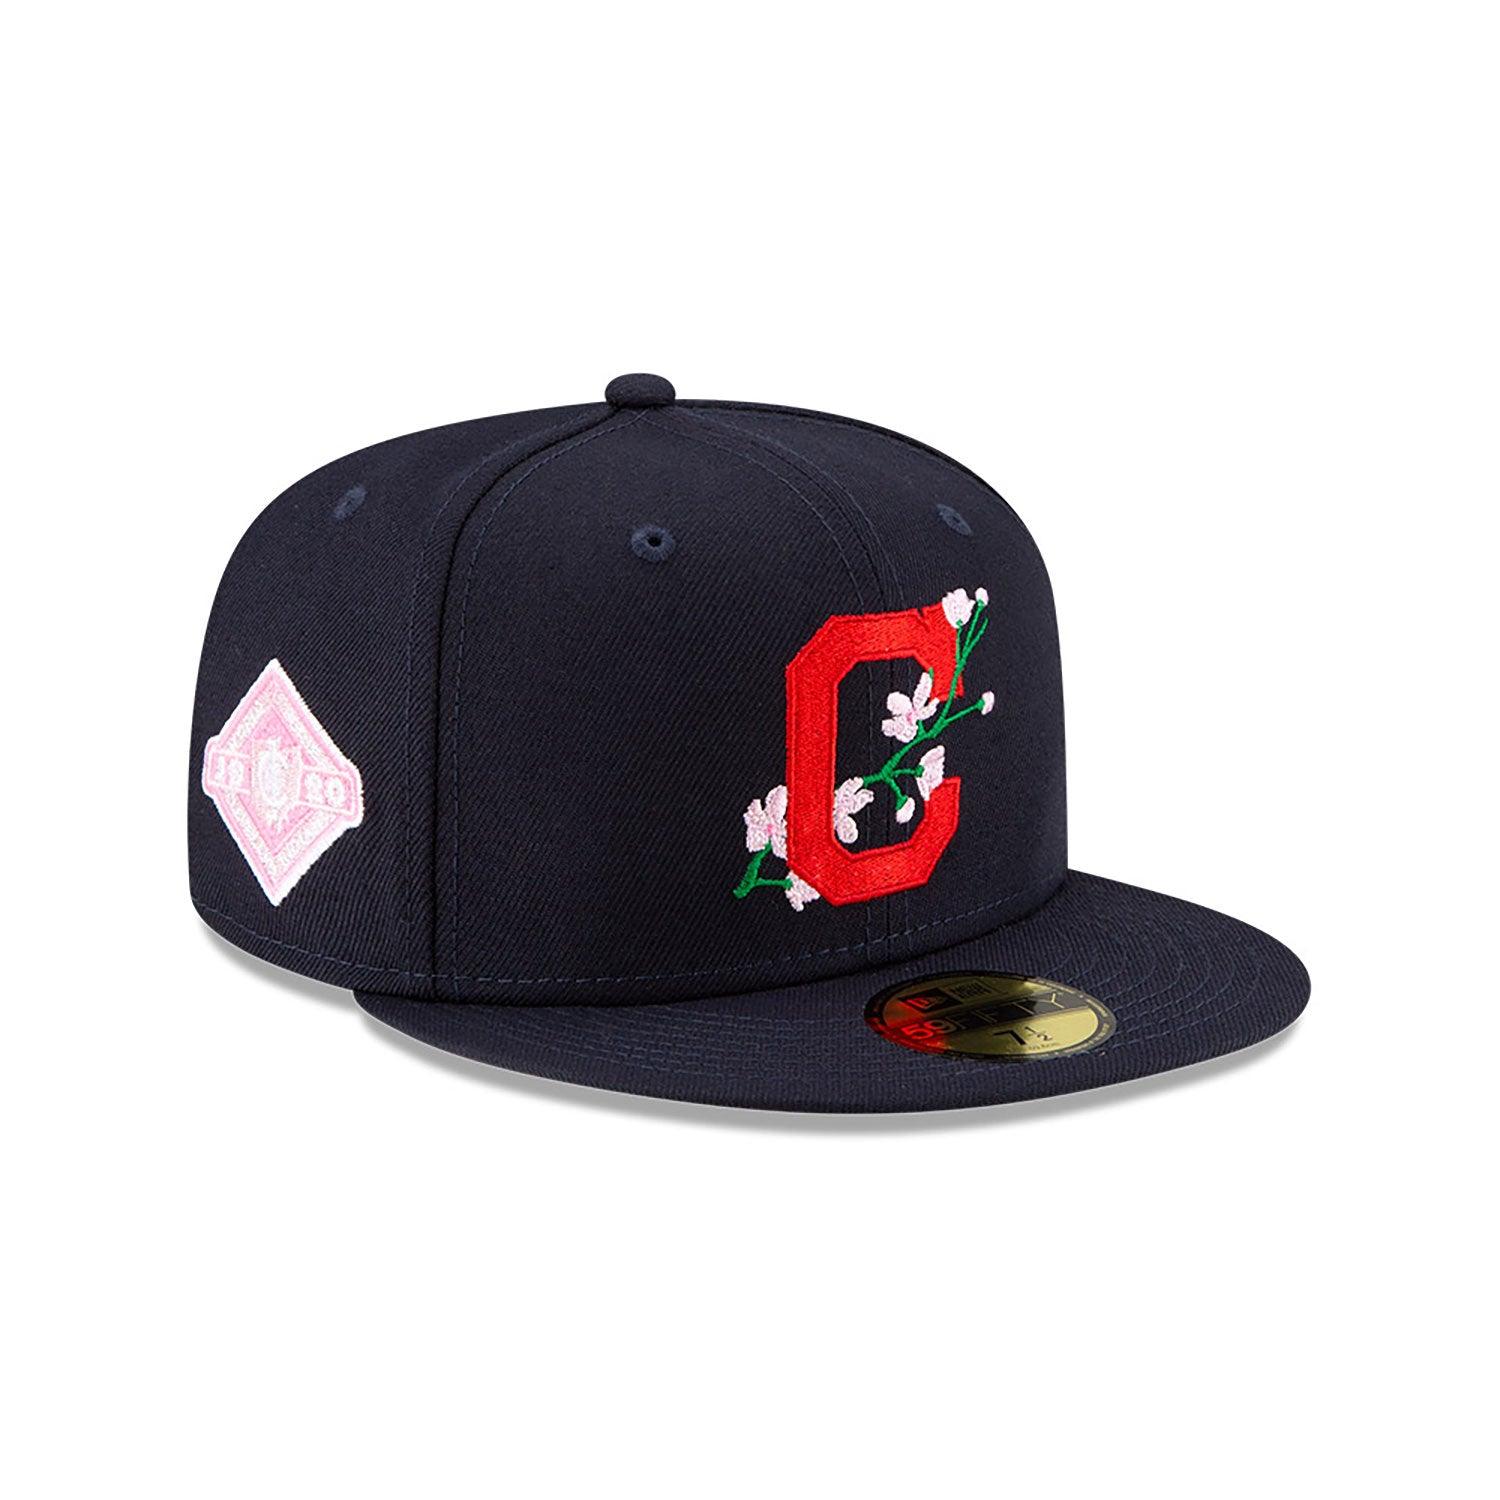 NEW ERA 59FIFTY MLB CLEVELAND GUARDIANS SIDE PATCH BLOOM NAVY / PINK UV FITTED CAP - FAM